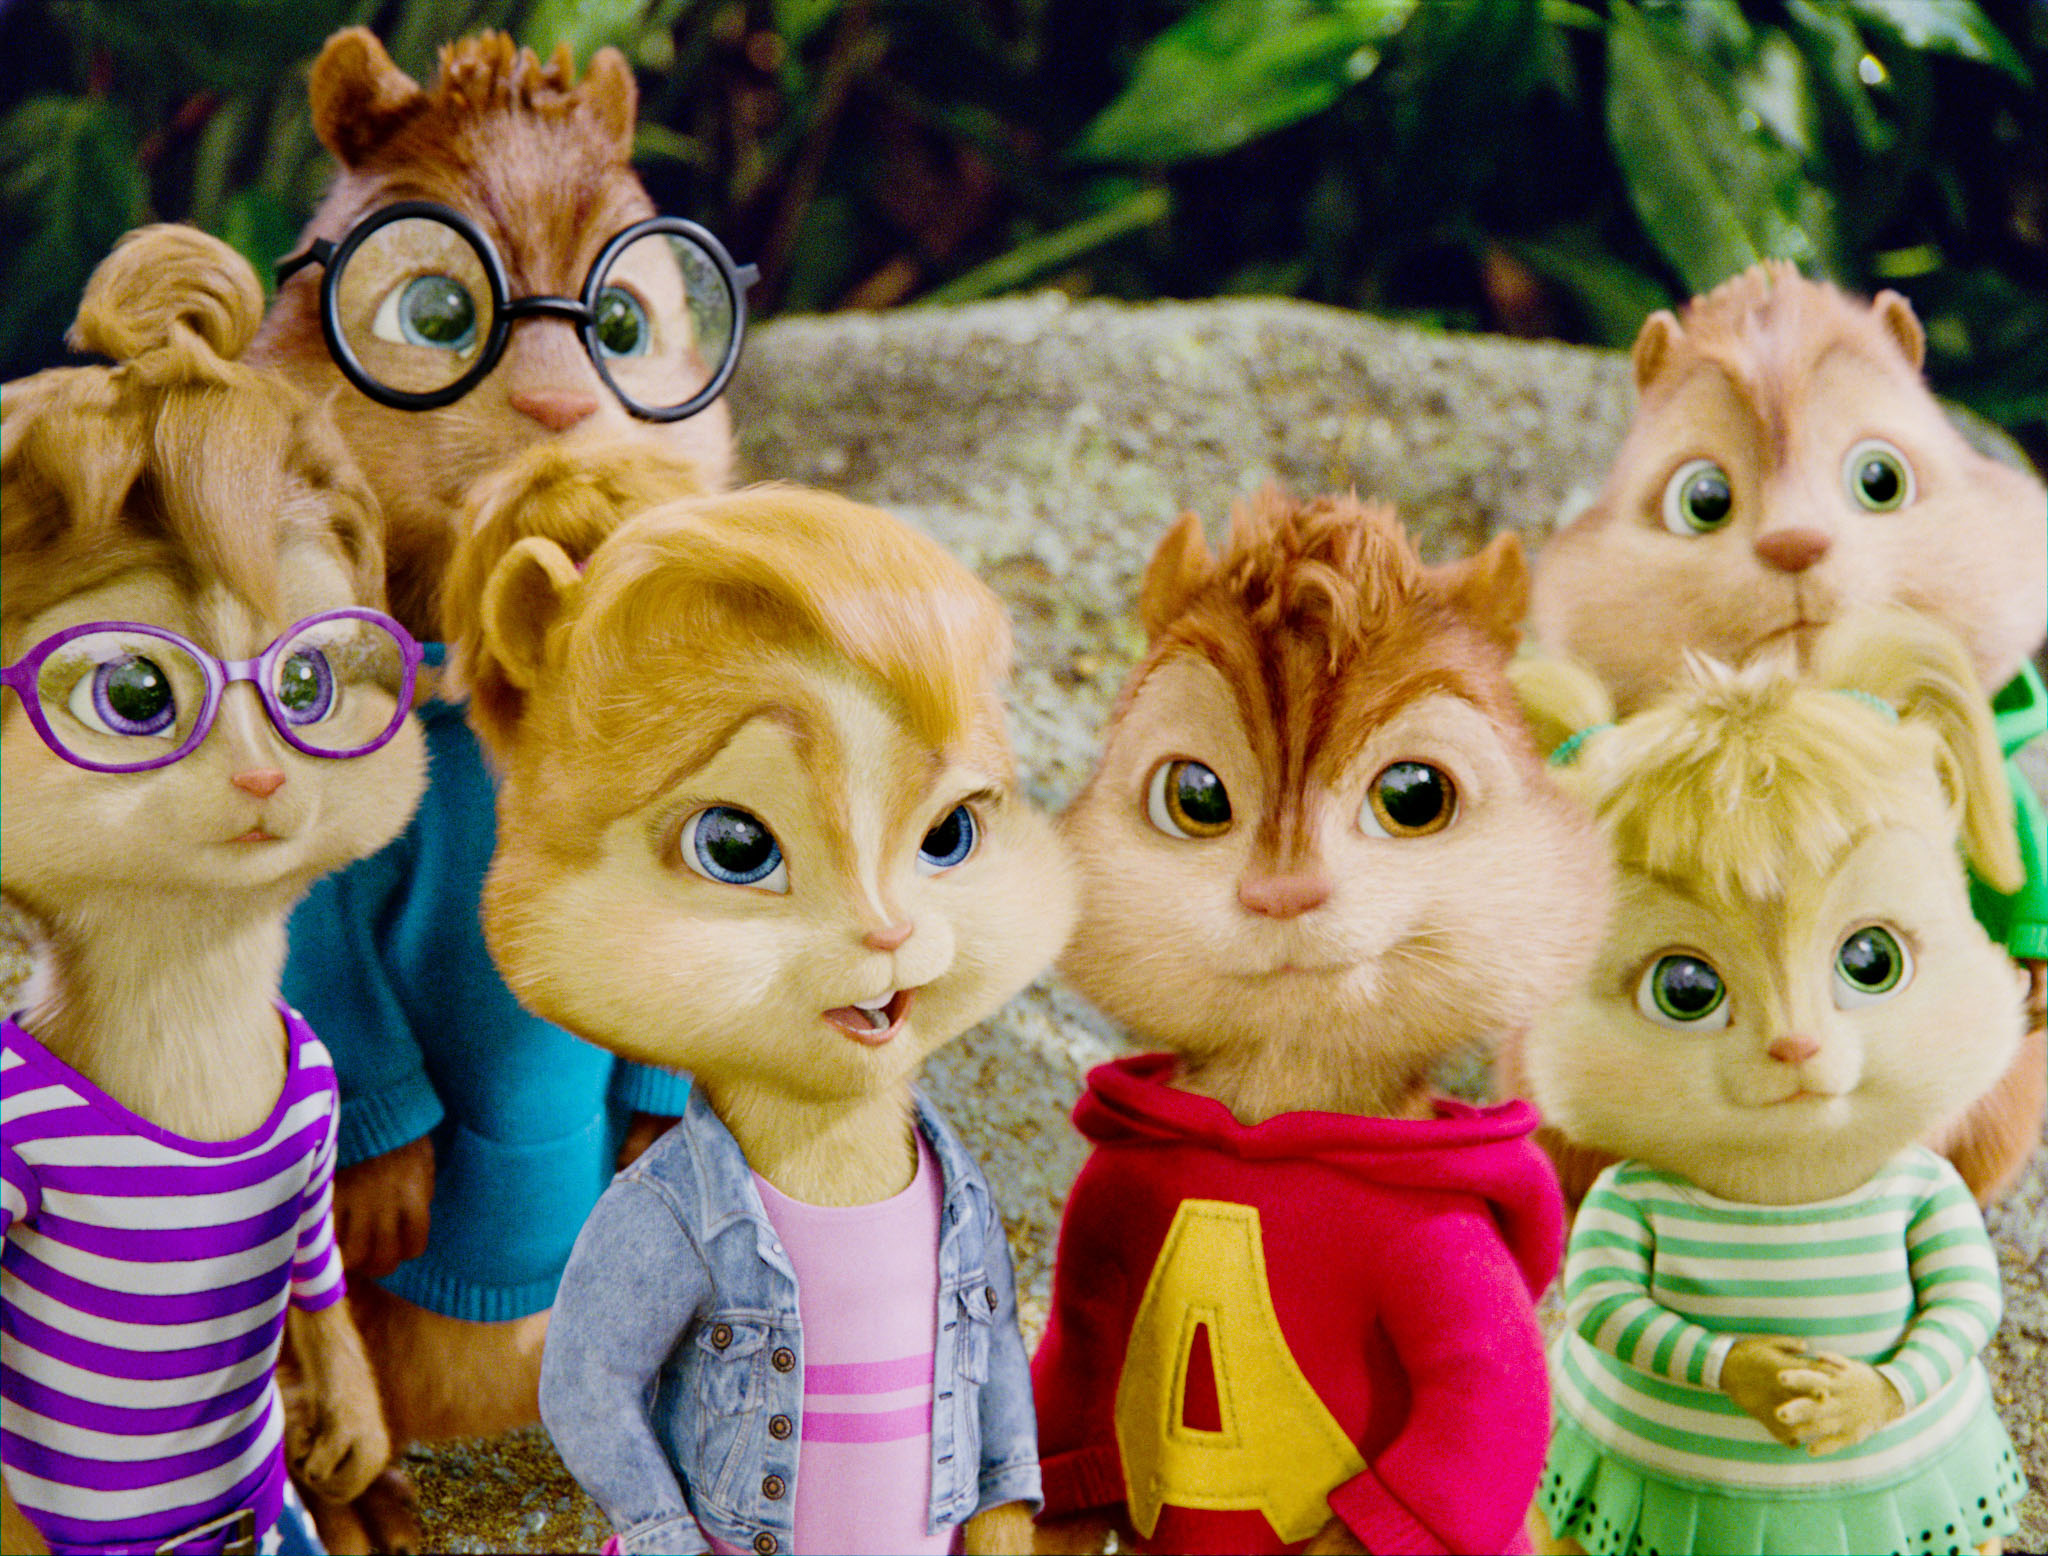 Alvin and the Chipmunks love